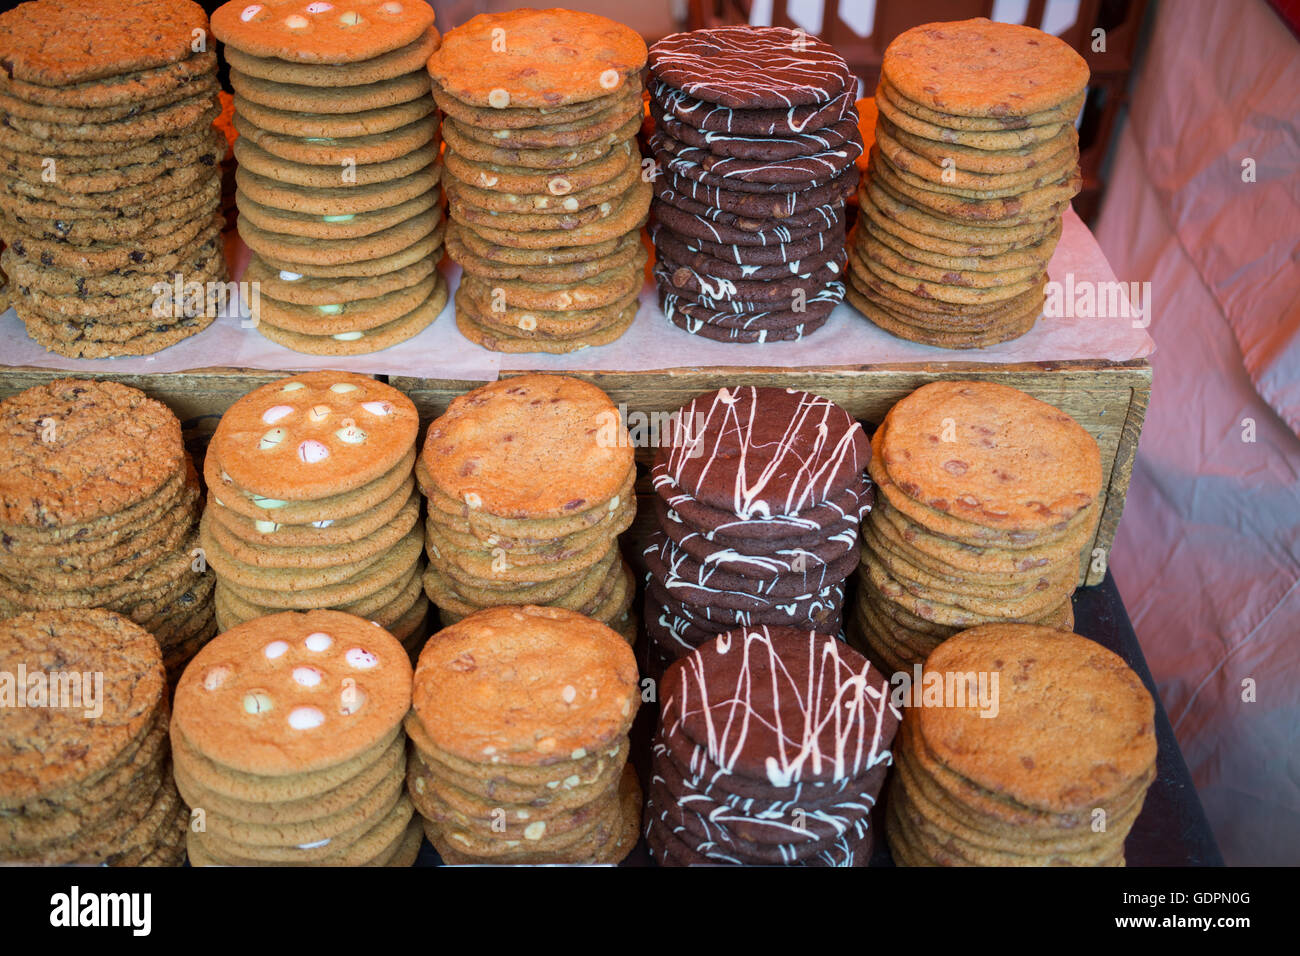 PIles of cookies on sale at a market stall Stock Photo